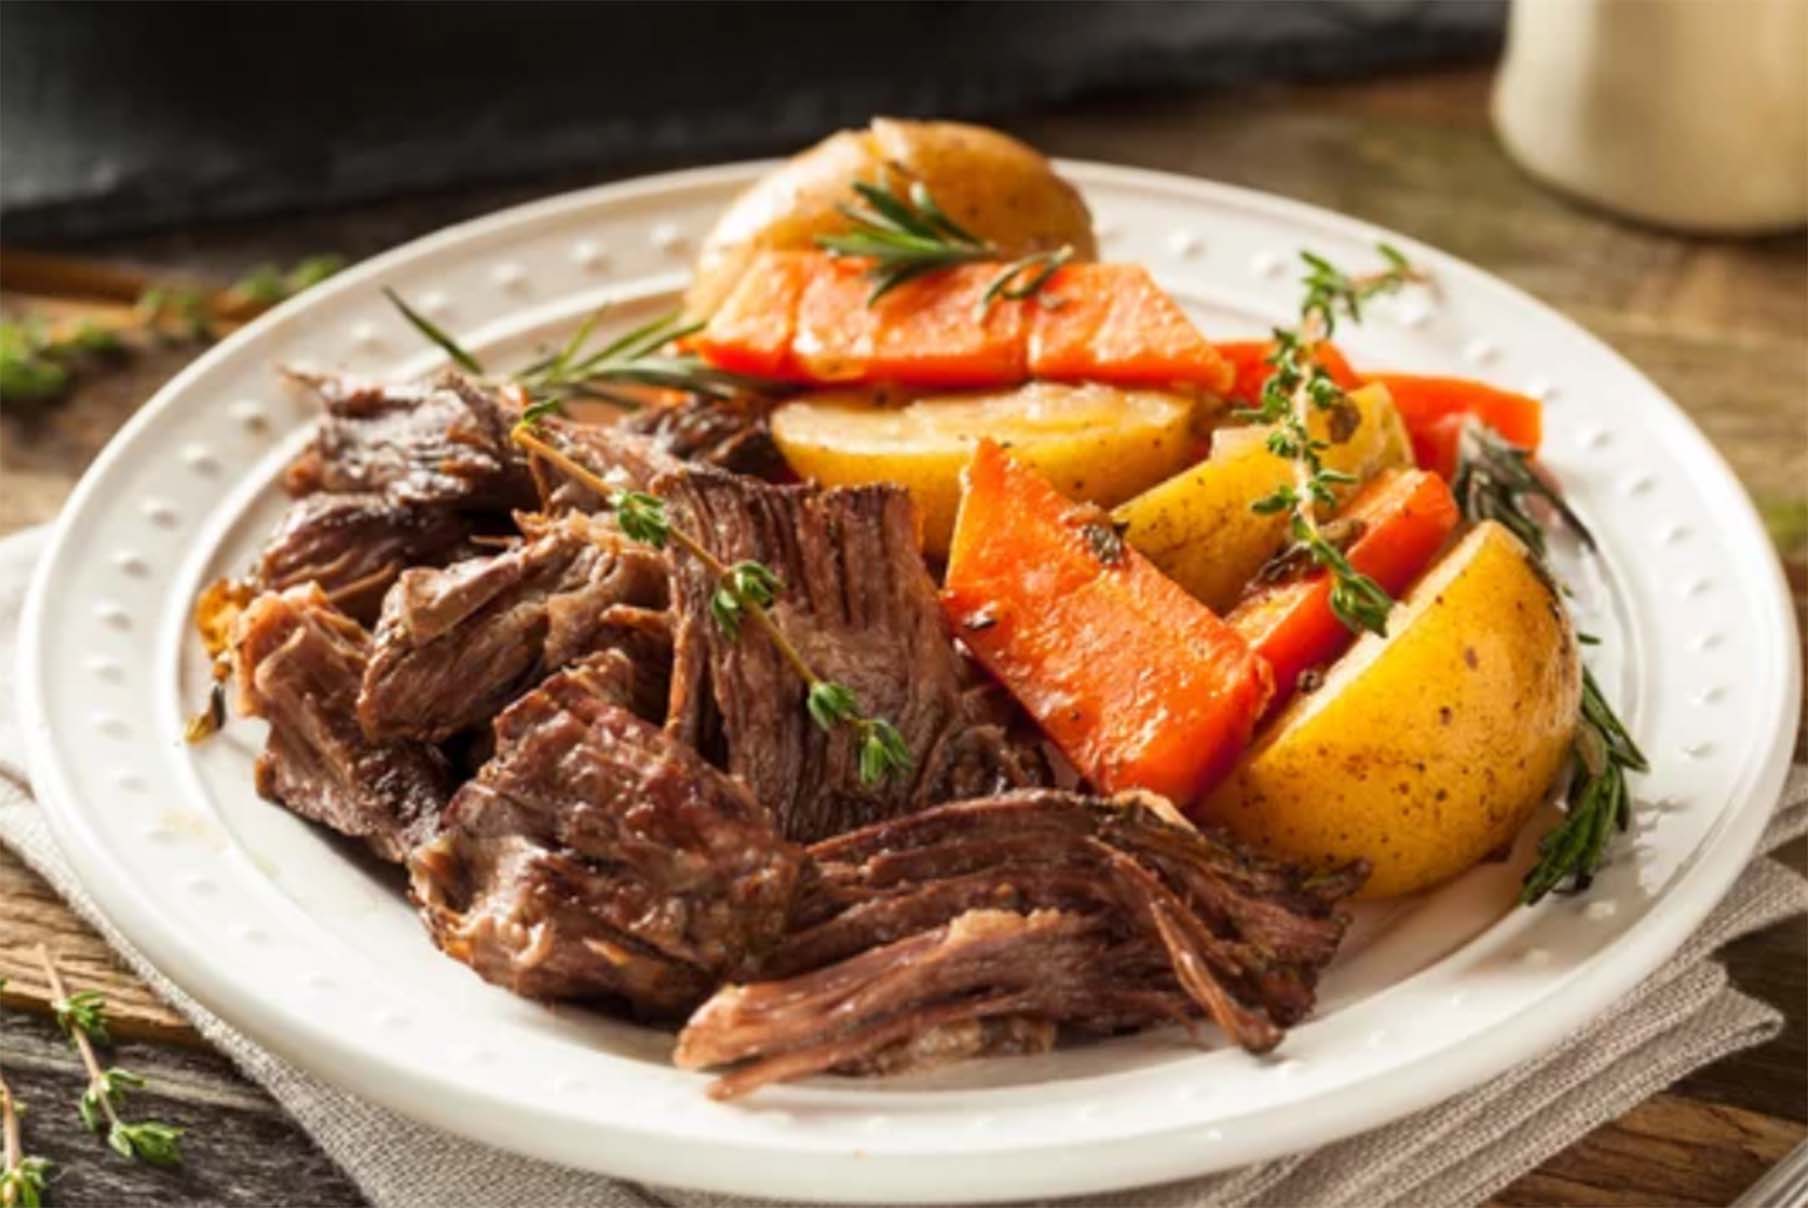 Home services: Try this pot roast for an old-fashioned comfort meal